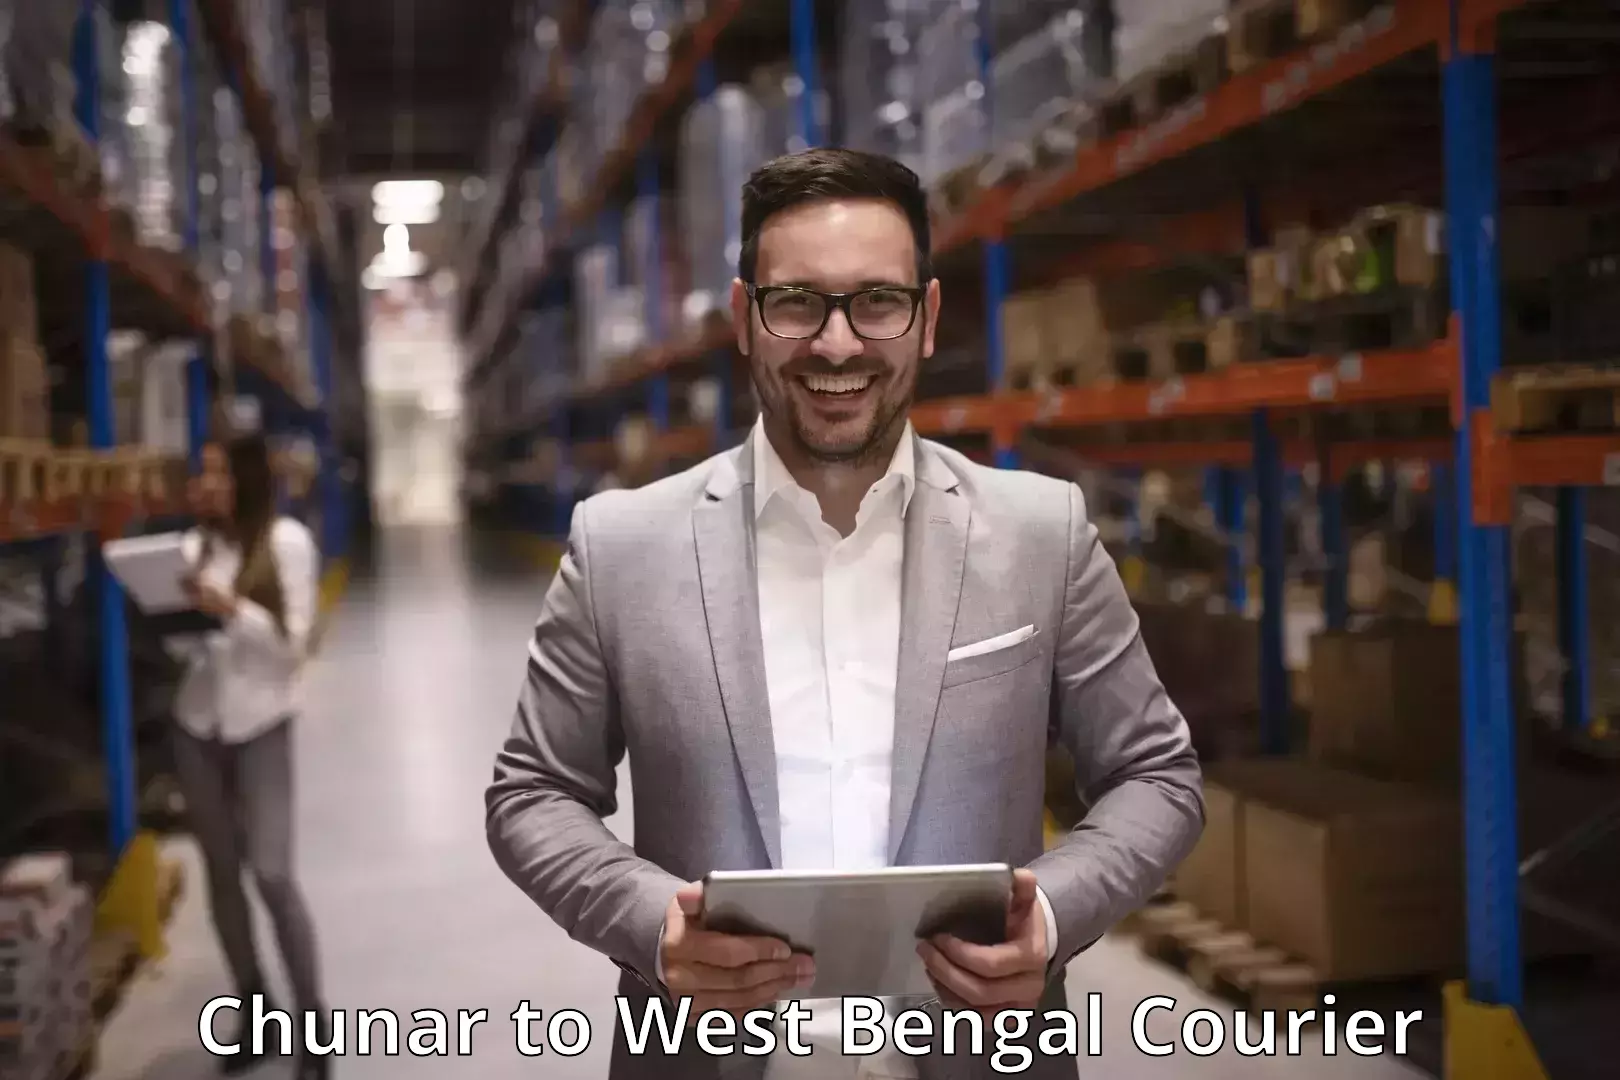 Global shipping networks Chunar to West Bengal